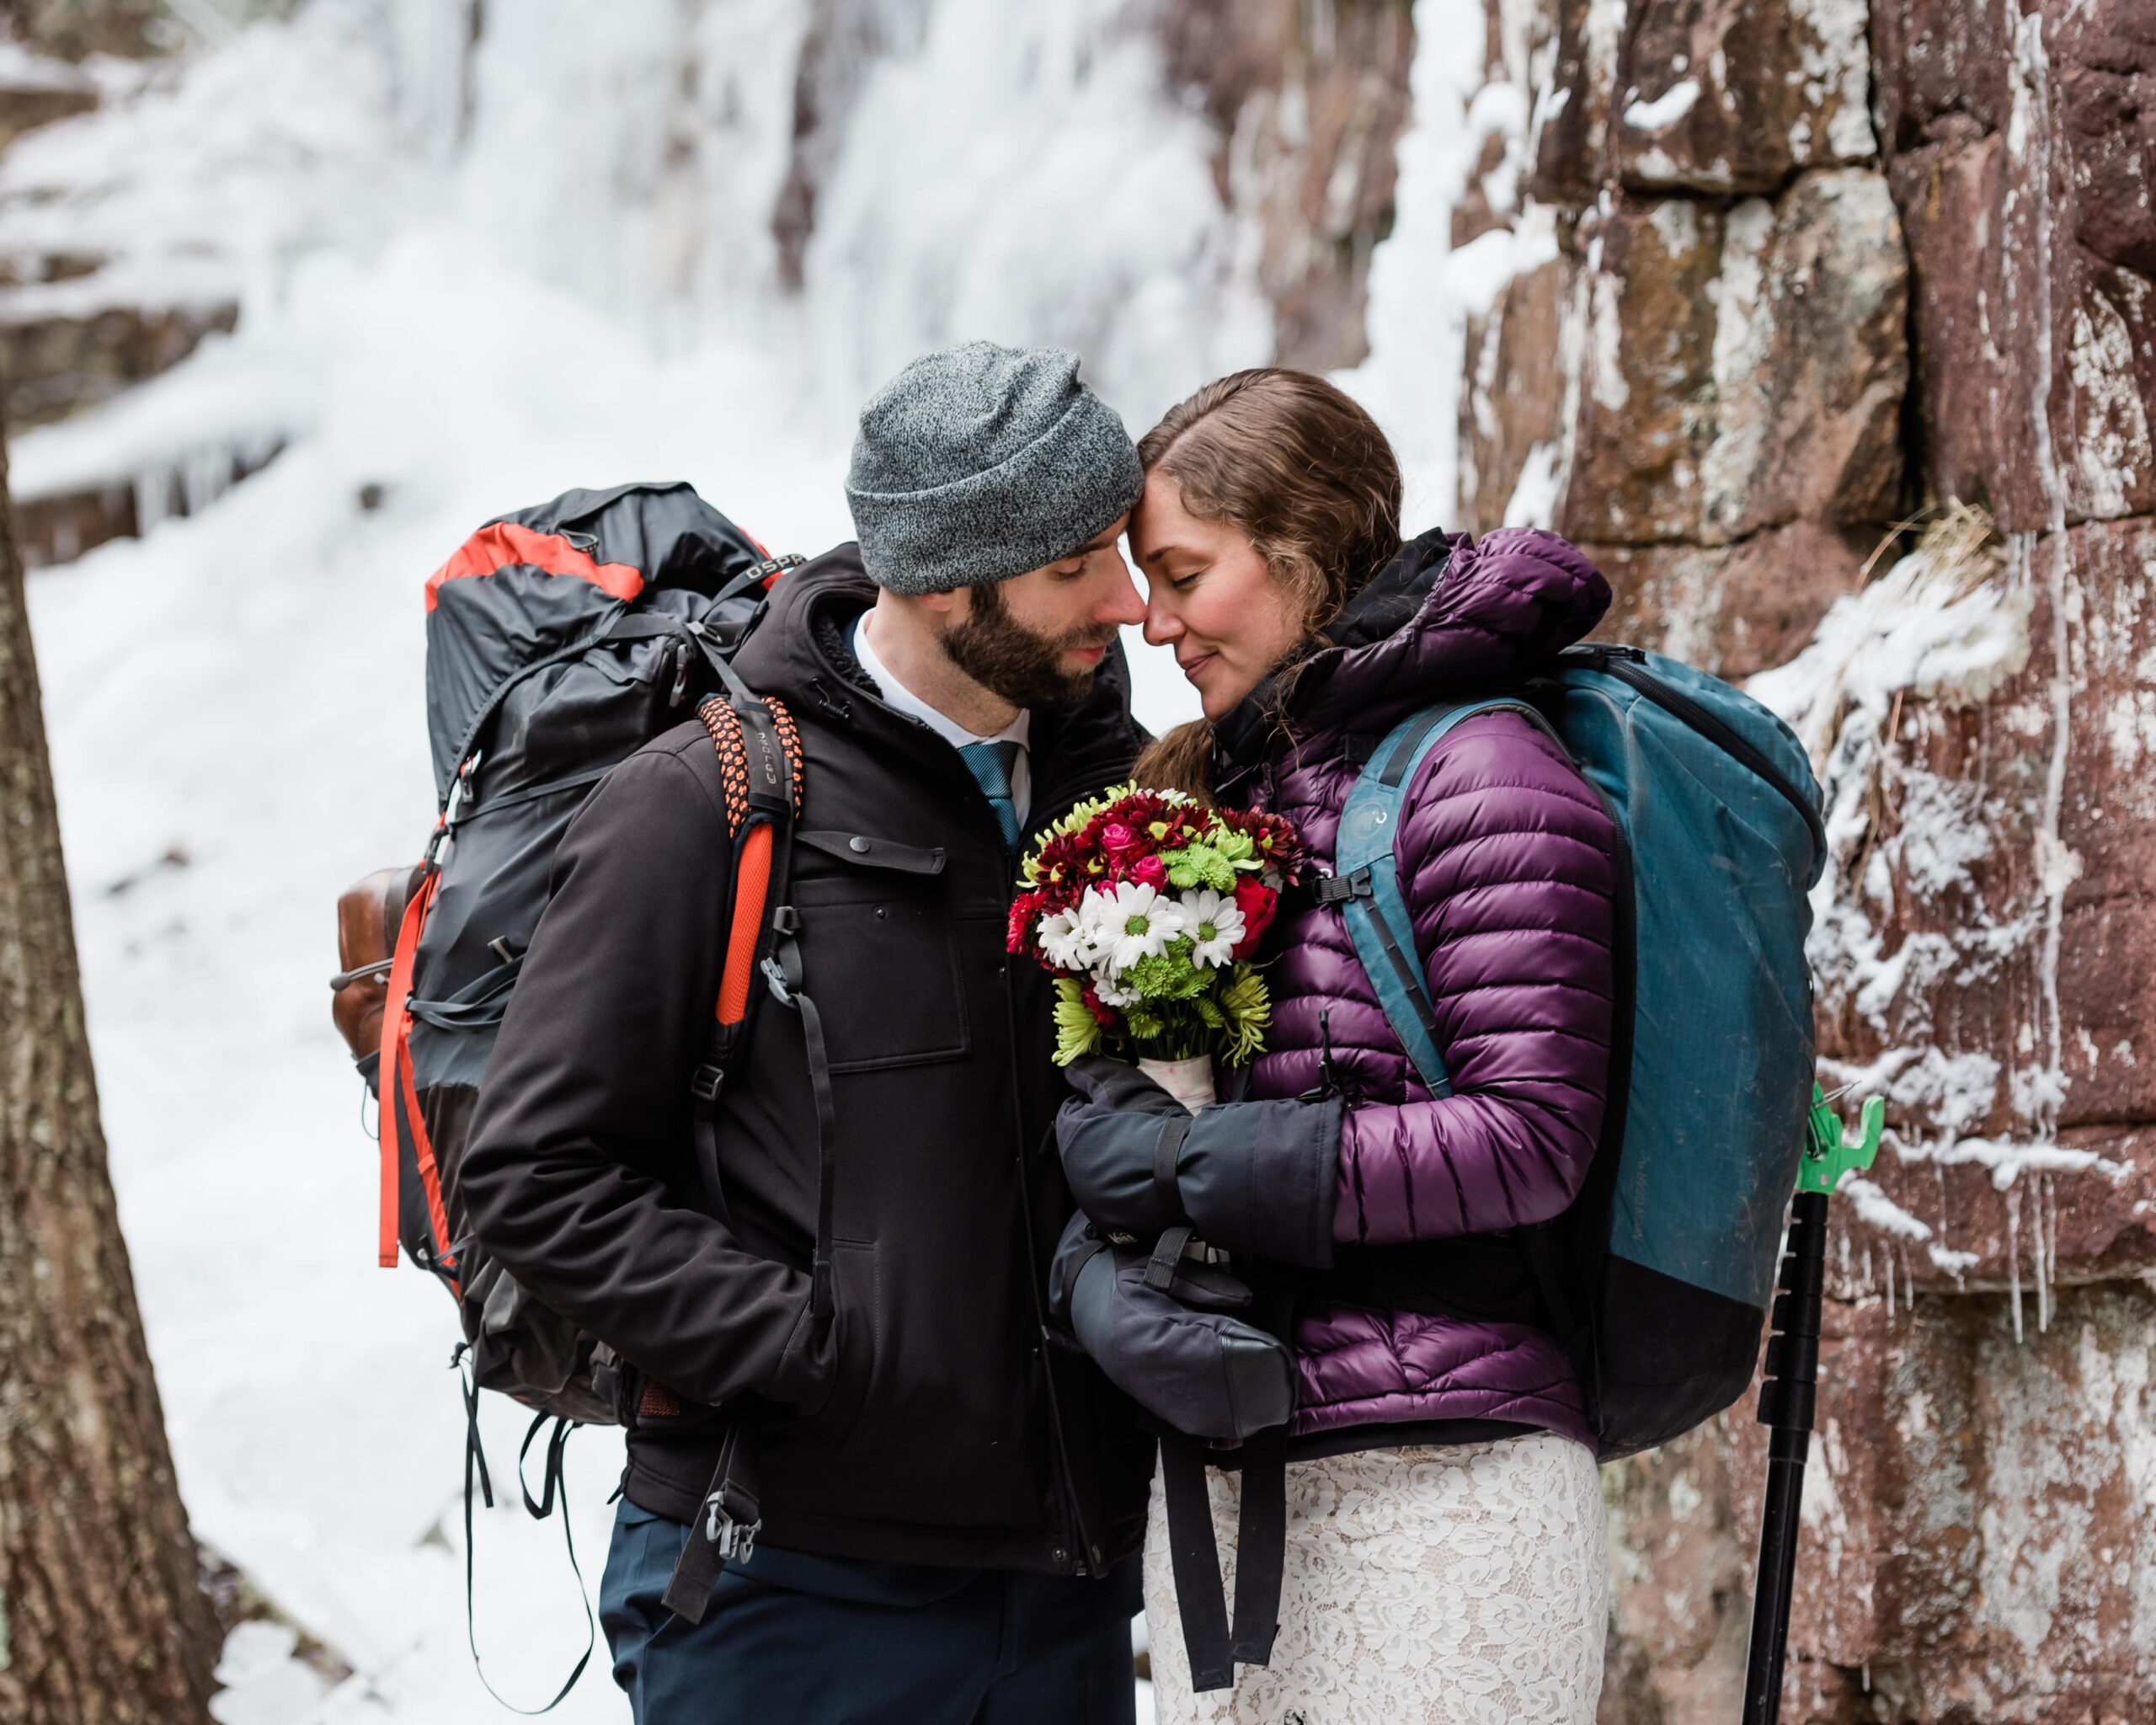 This is a Chattanooga elopement in winter. This picture is the bride and groom bundled up in the snowy forest.